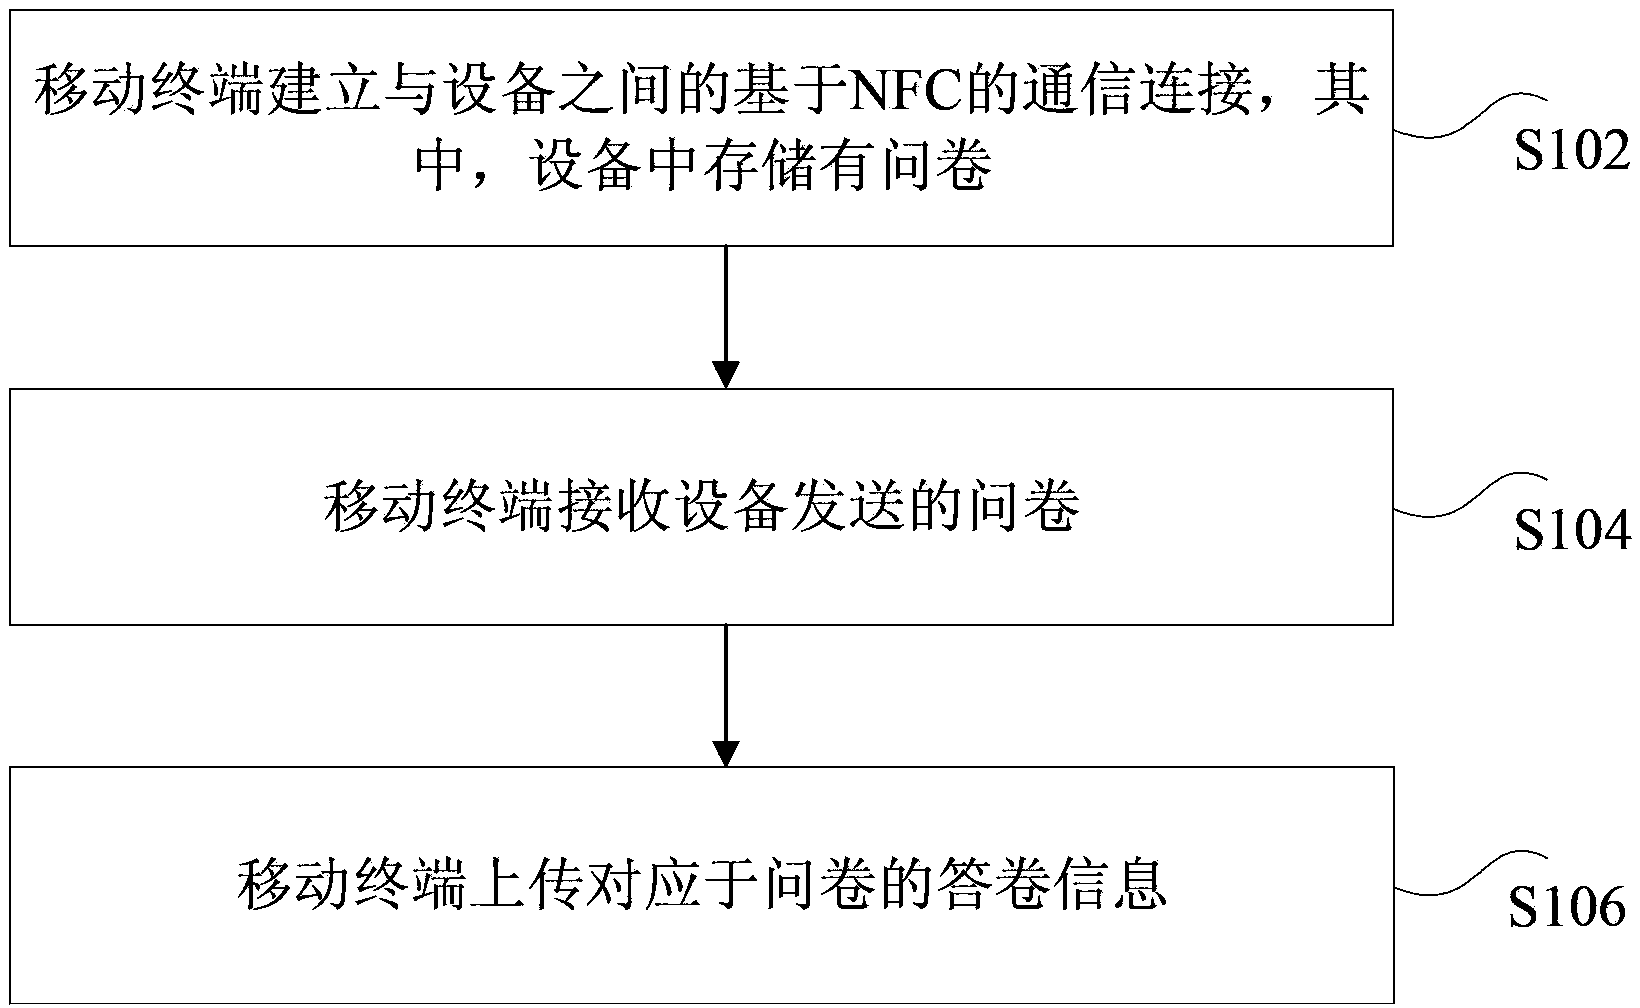 Questionnaire survey method and device based on NFC